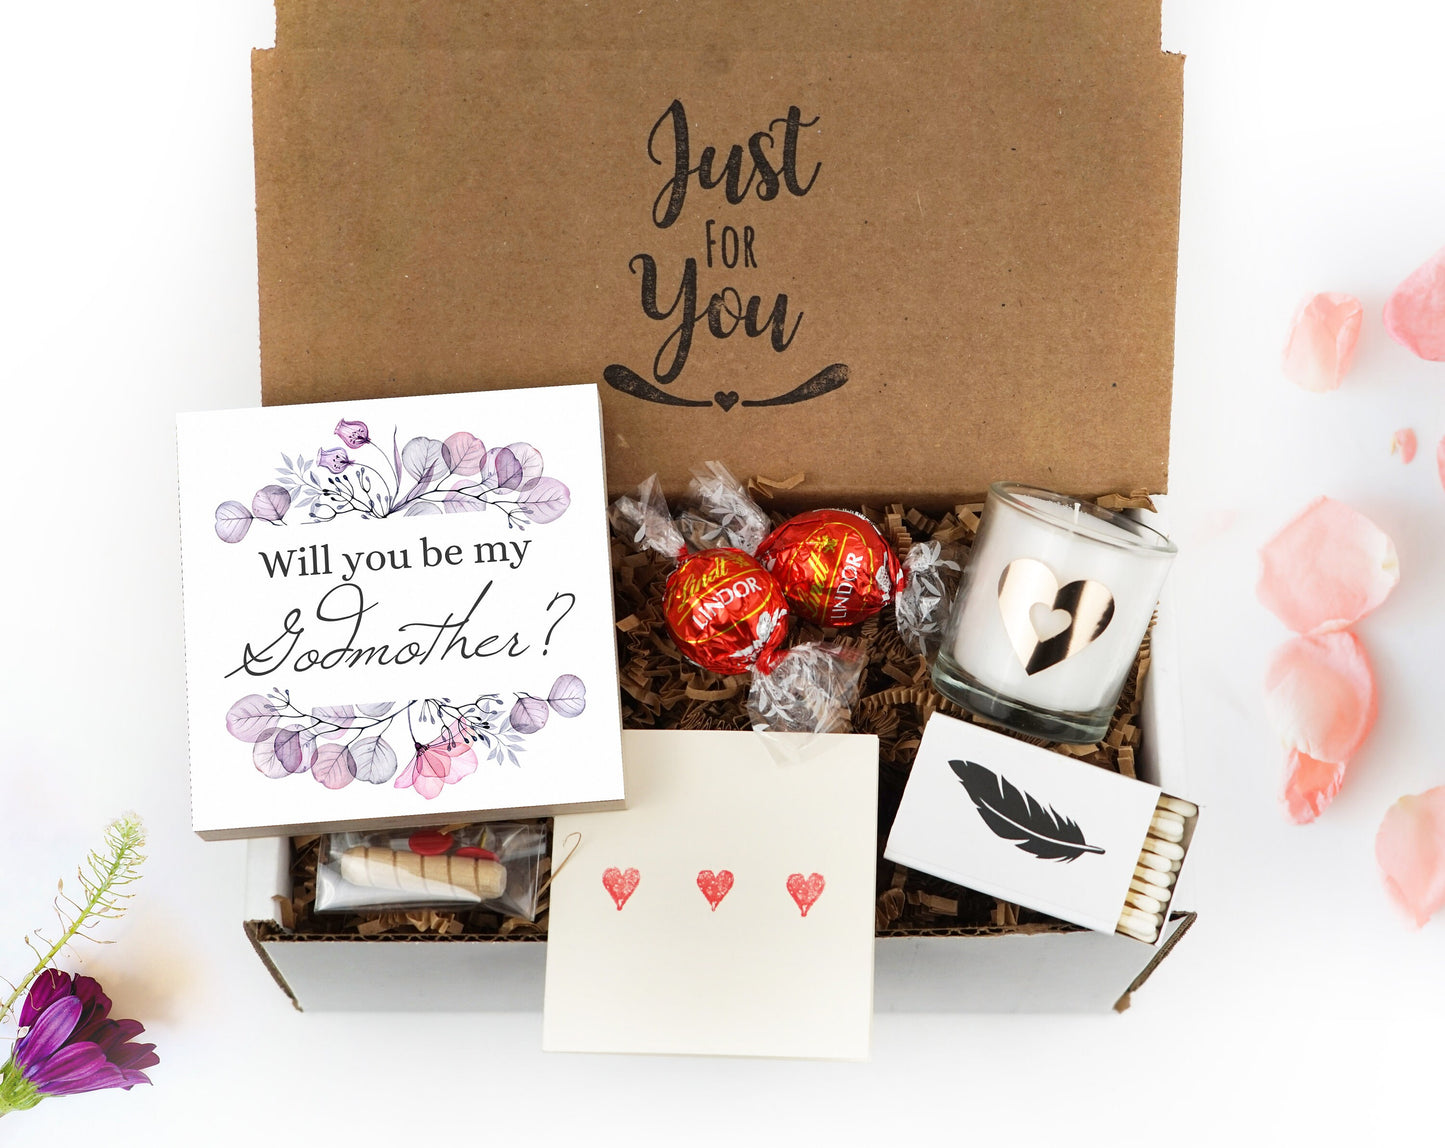 Personalized Godmother Proposal Box - Custom Photo Block 4" or 6" - Spa Gifts - Will You Be My Godmother Gift Box